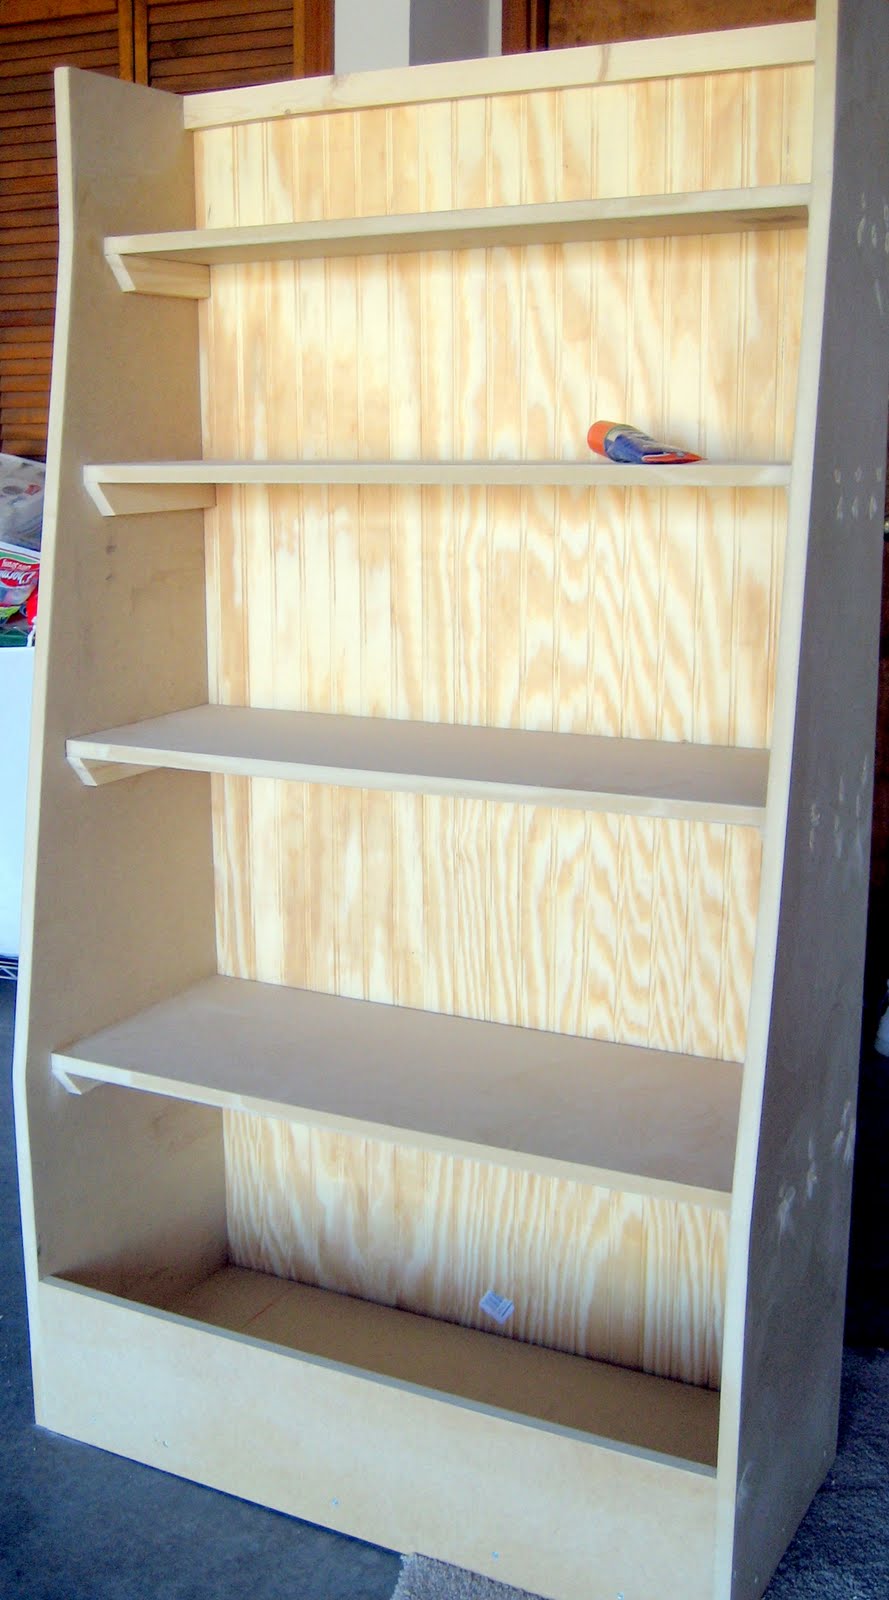 The Alexanders Land Of Nod Bankable Bookcase Knock Off